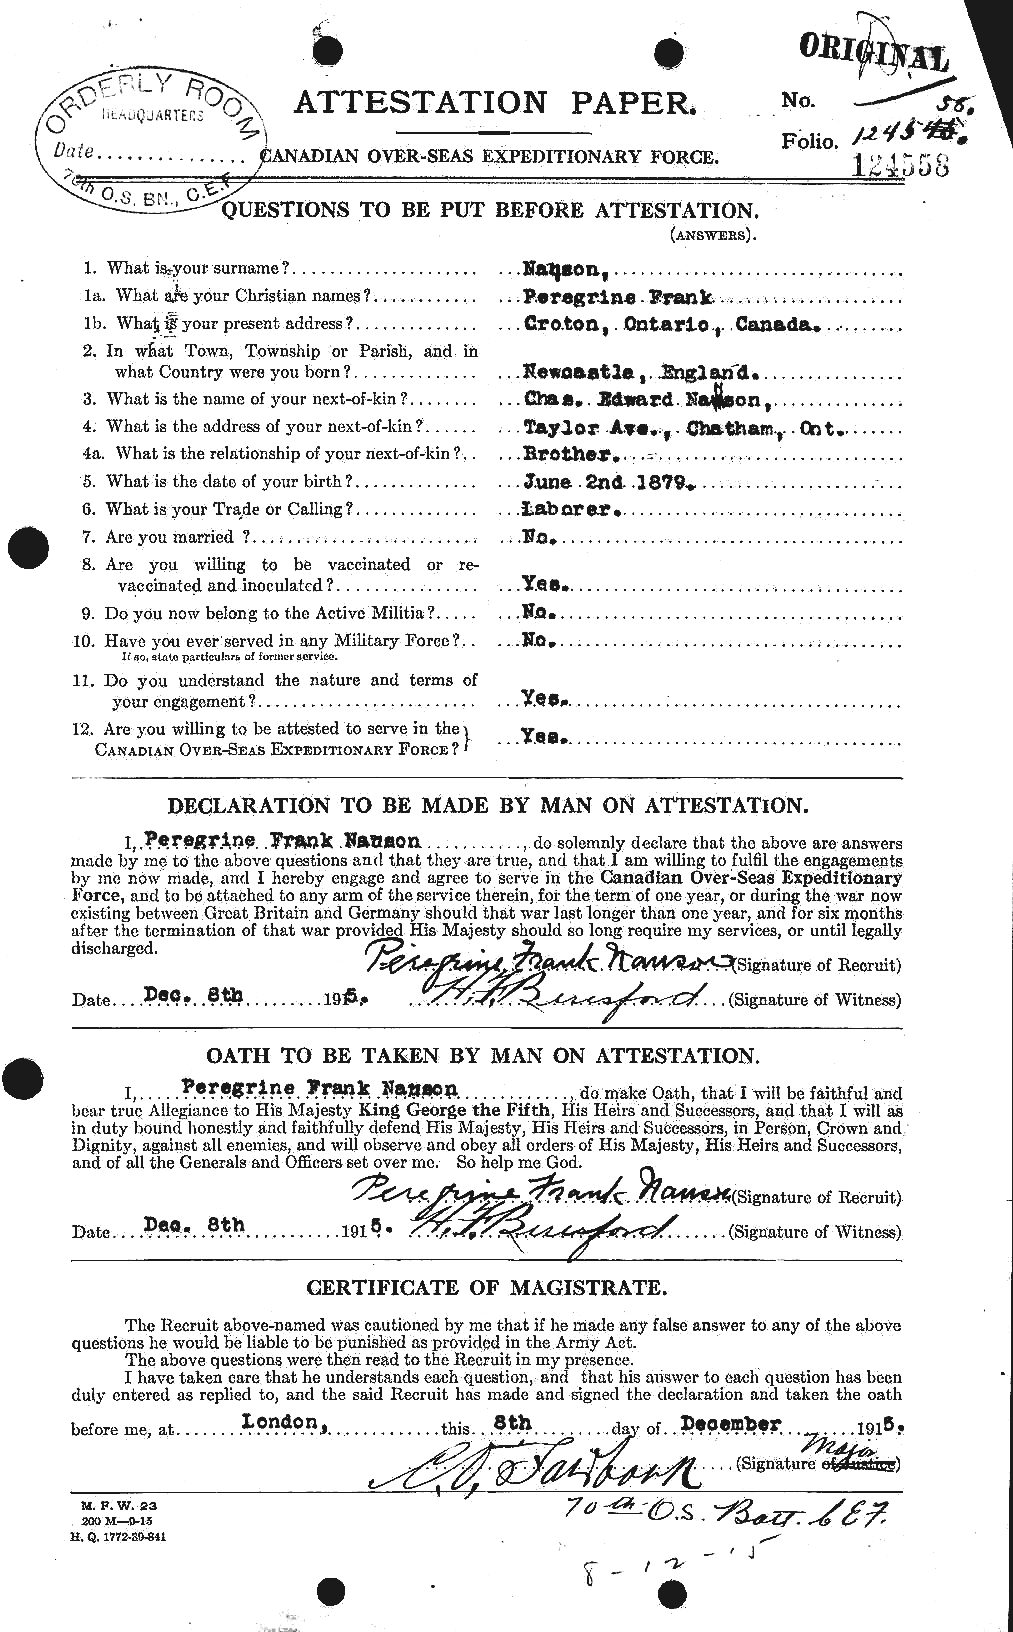 Personnel Records of the First World War - CEF 544515a